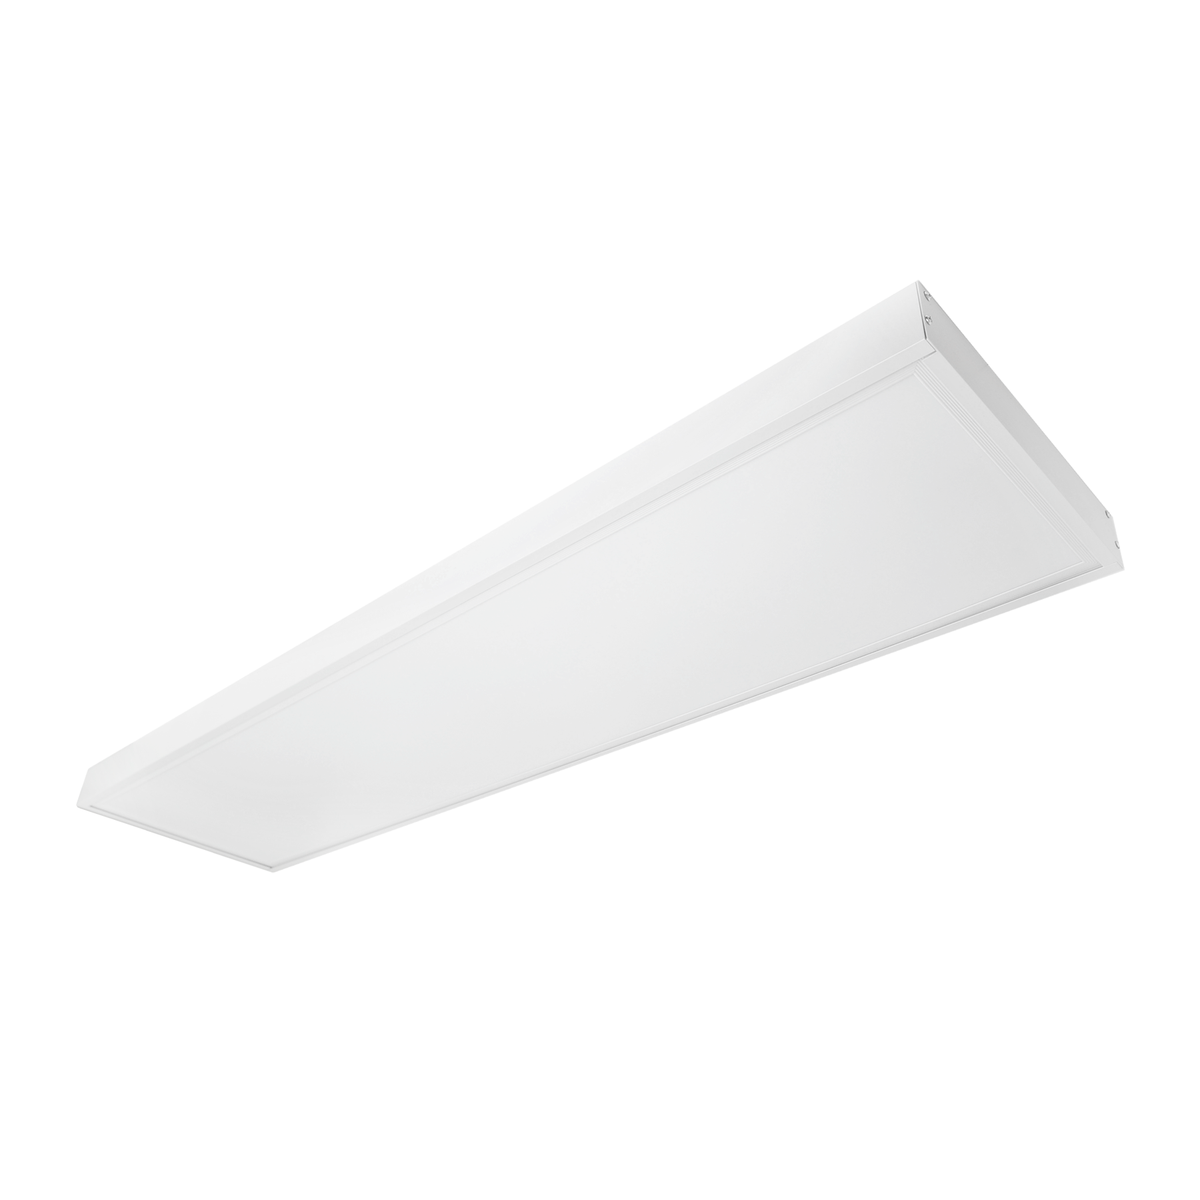 G.W.S. LED 1195x295mm LED Panel Lights Surface Mounted (With Mounting Frame Kit) / Neutral White (4000K) / No 1195x295mm 42W White Frame LED Panel Light